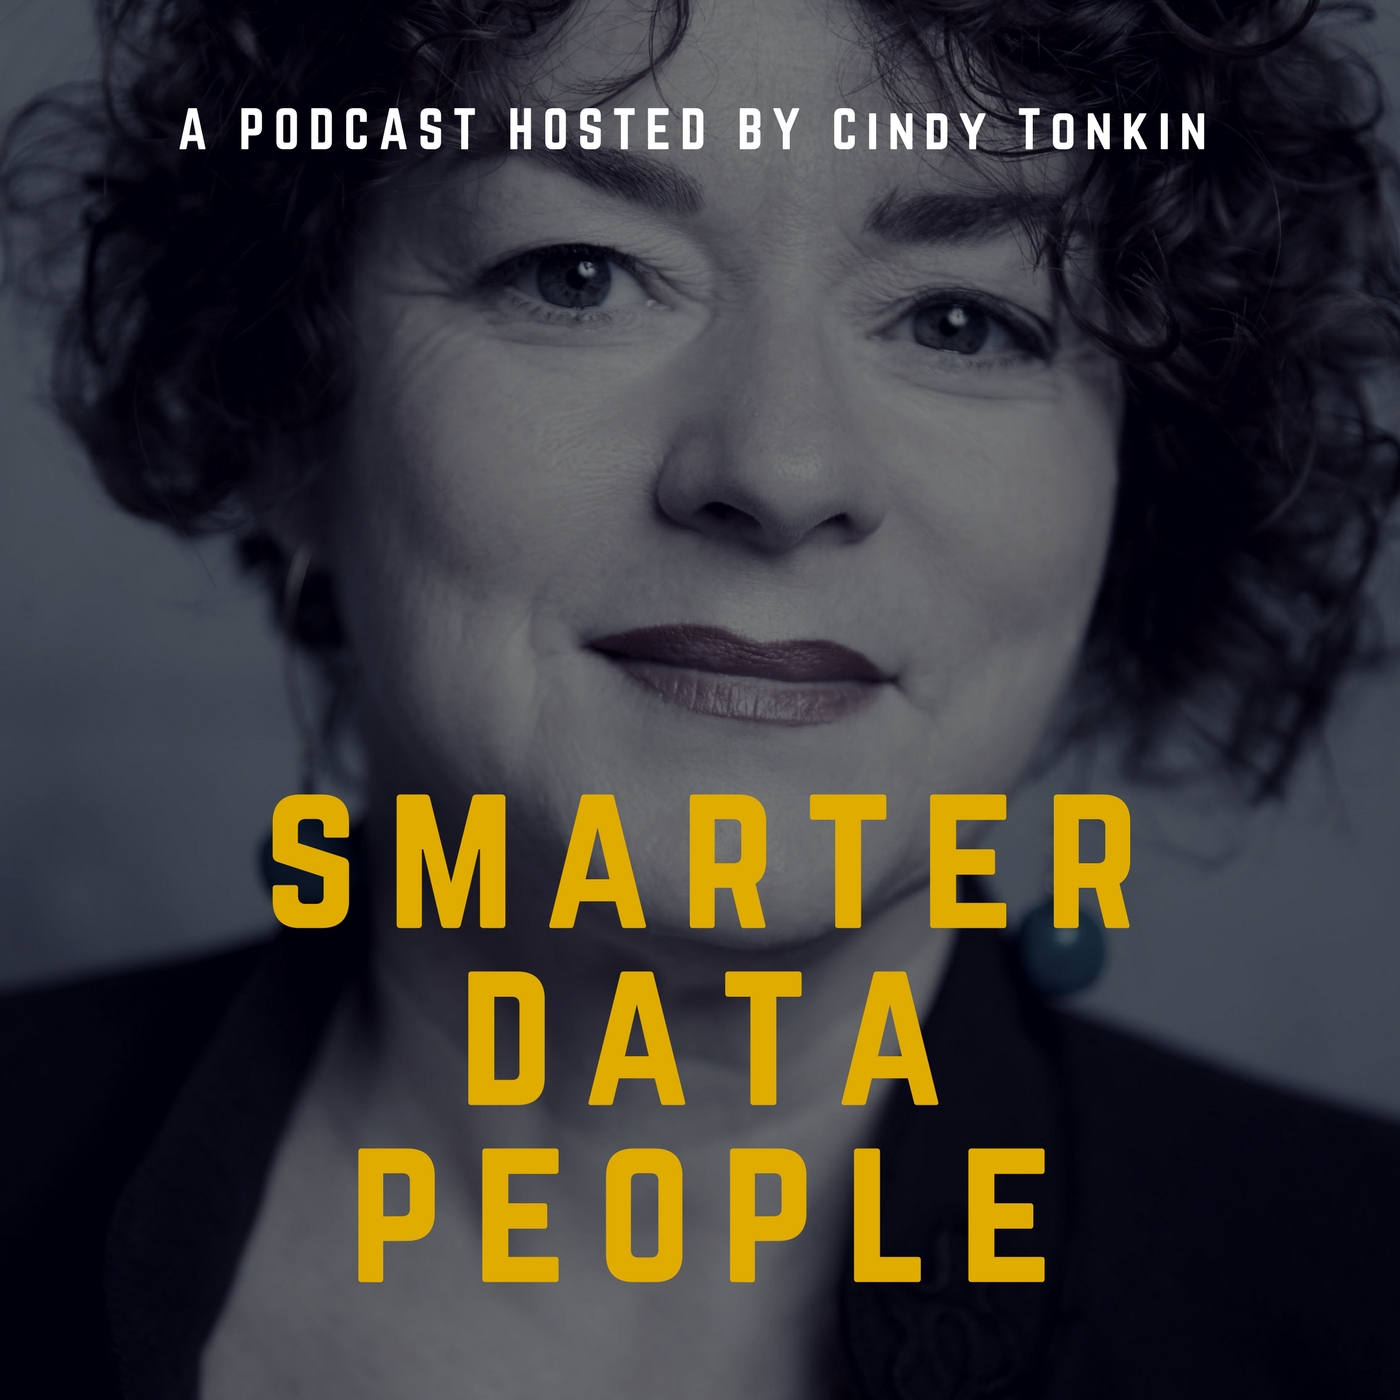 consultants consultant cindy tonkin smarter data people